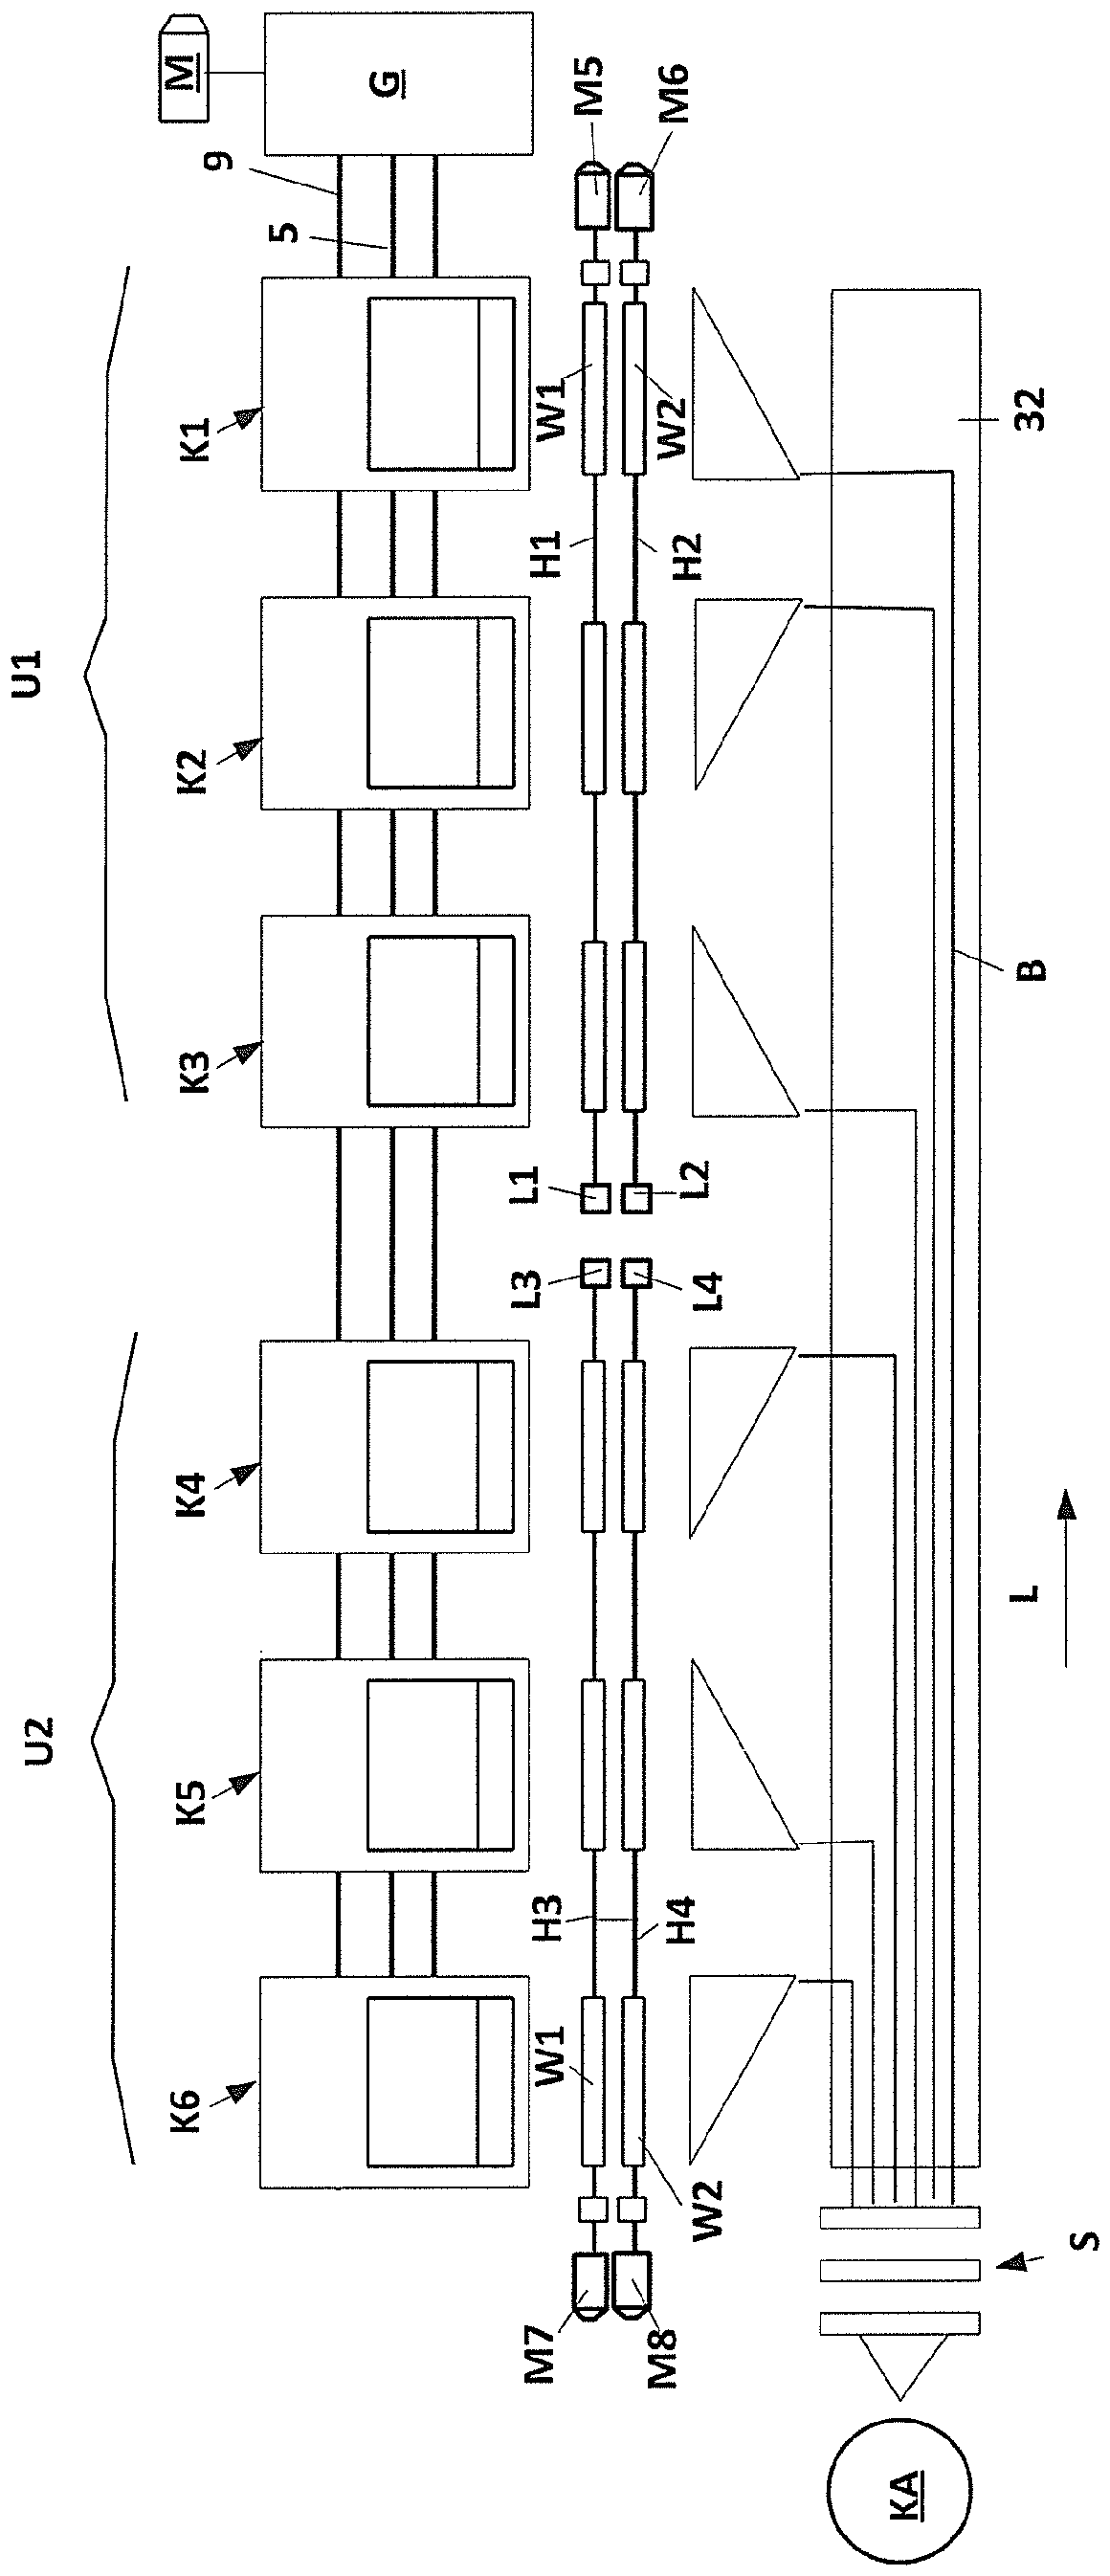 Individual drive for detaching rollers of a combing machine